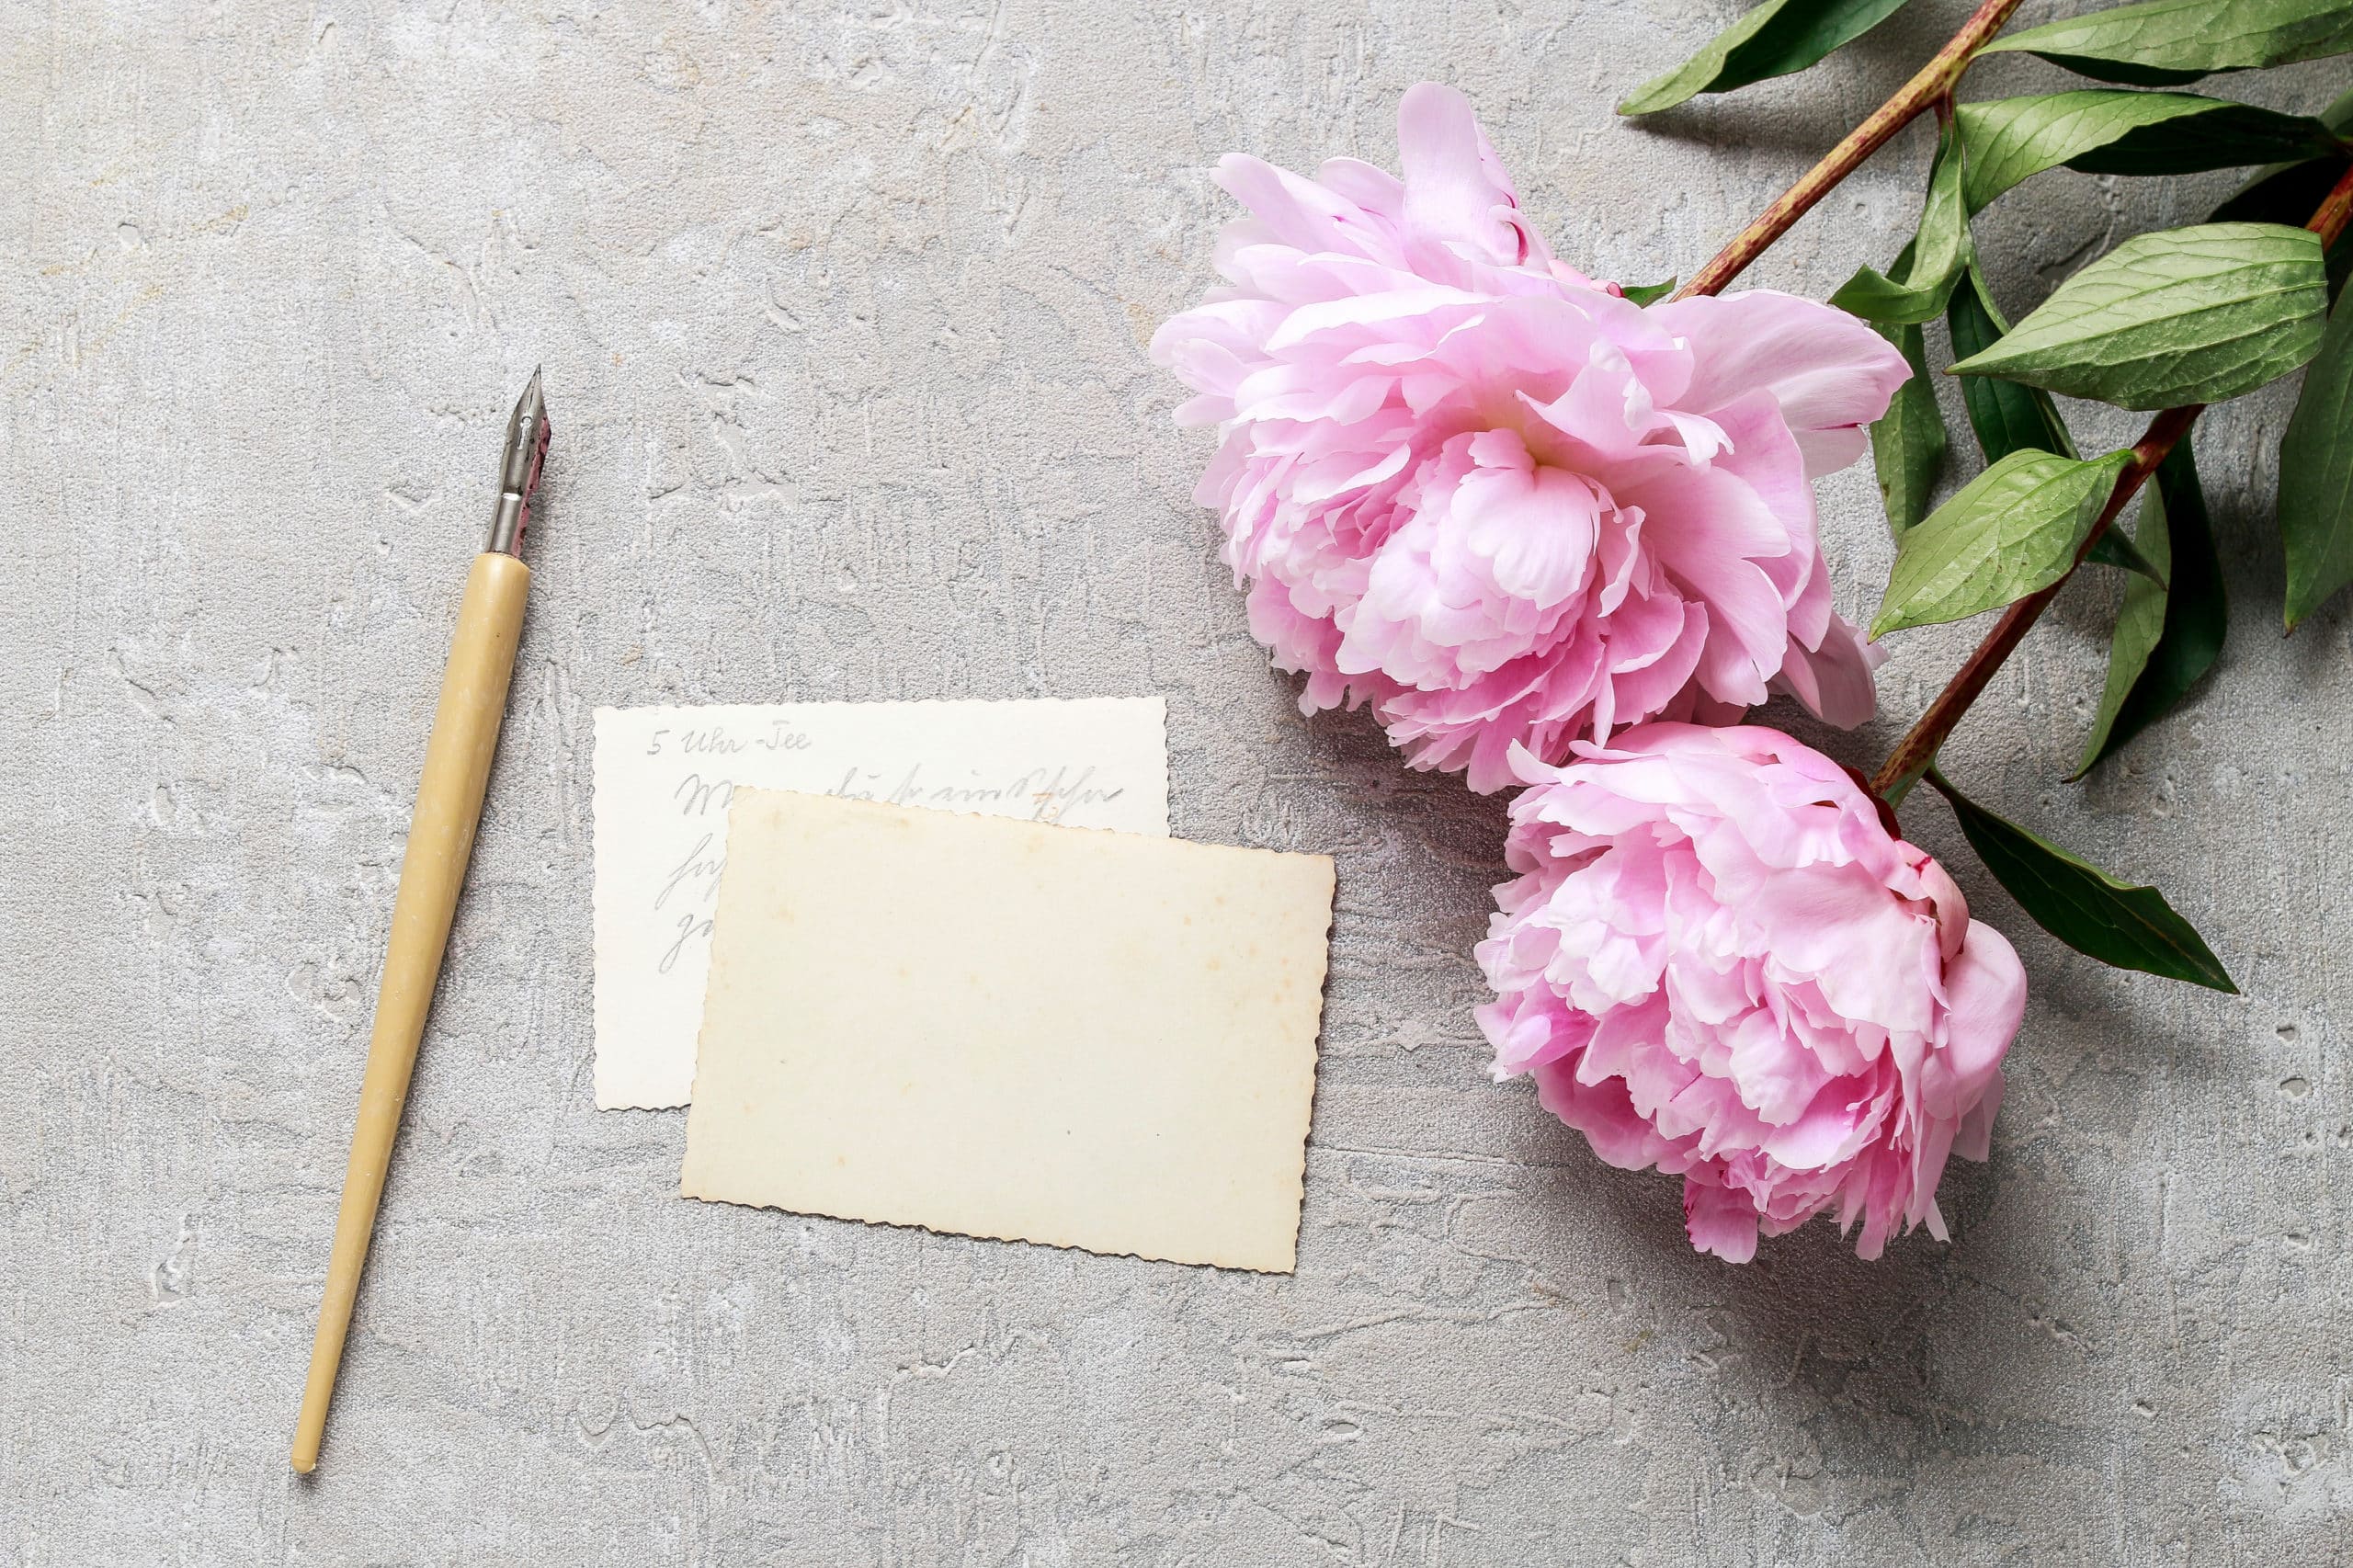 Handwritten letters and pink peonies on grey background